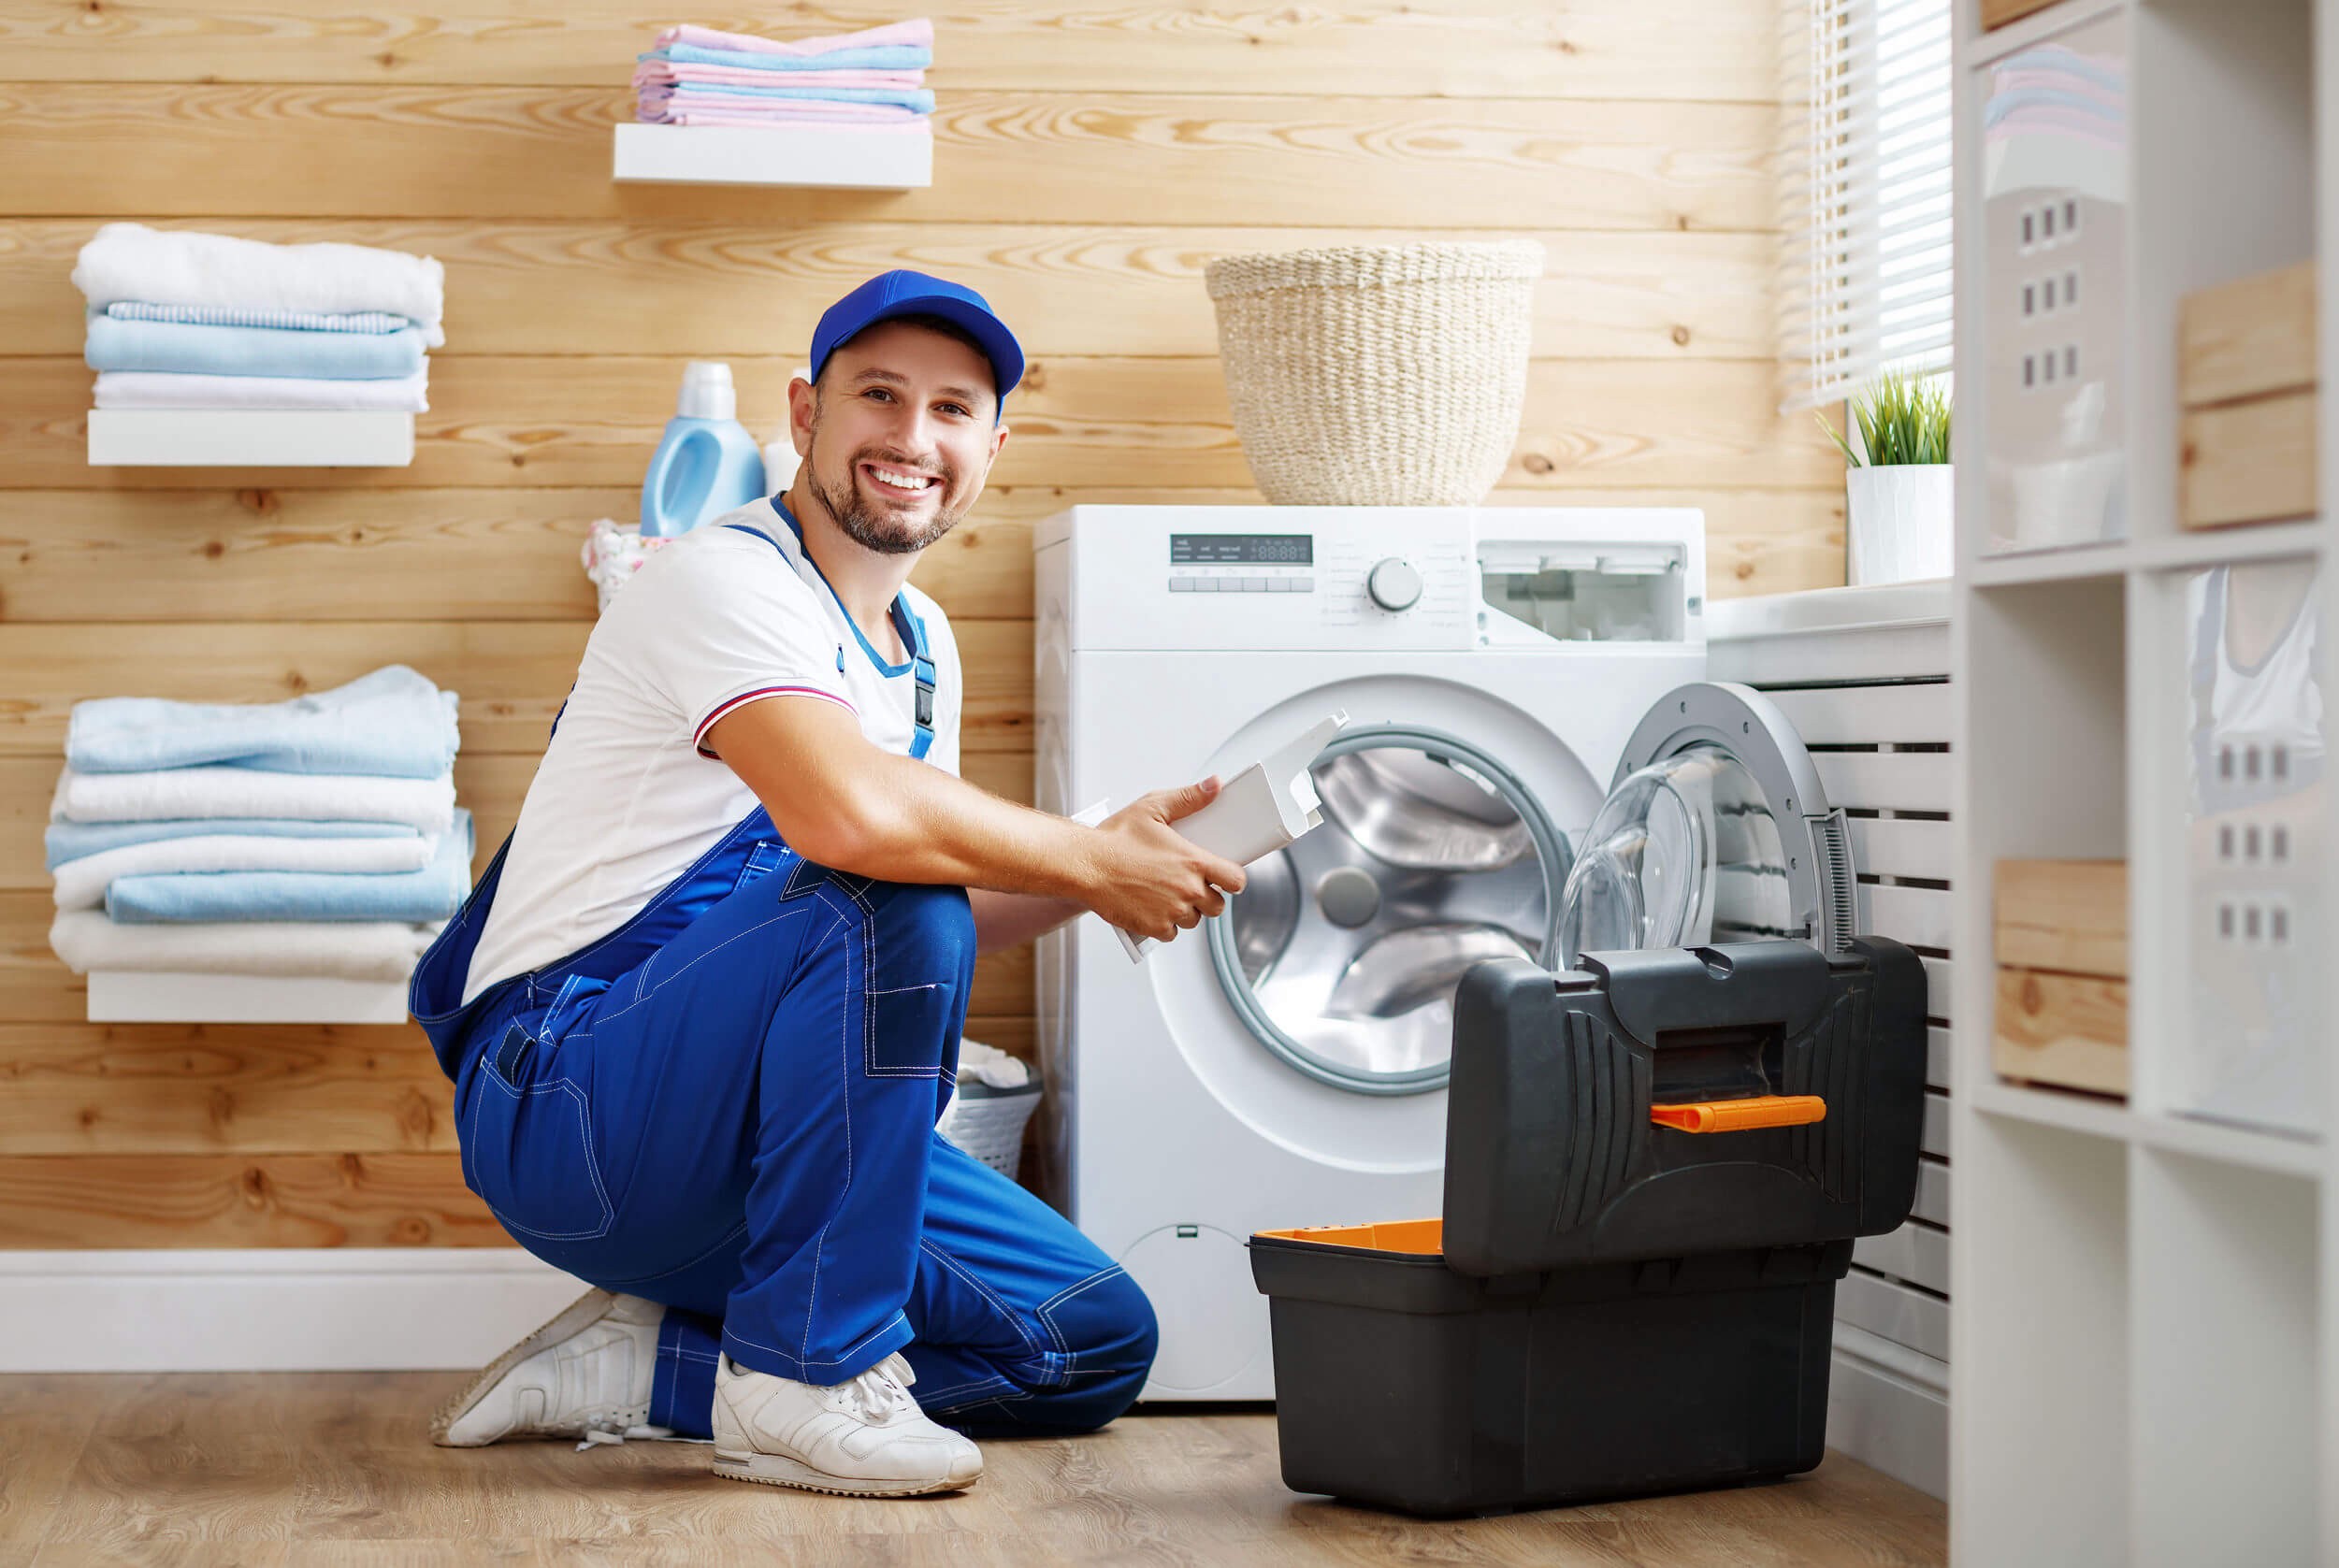 Top five benefits of Appliance Repair Services